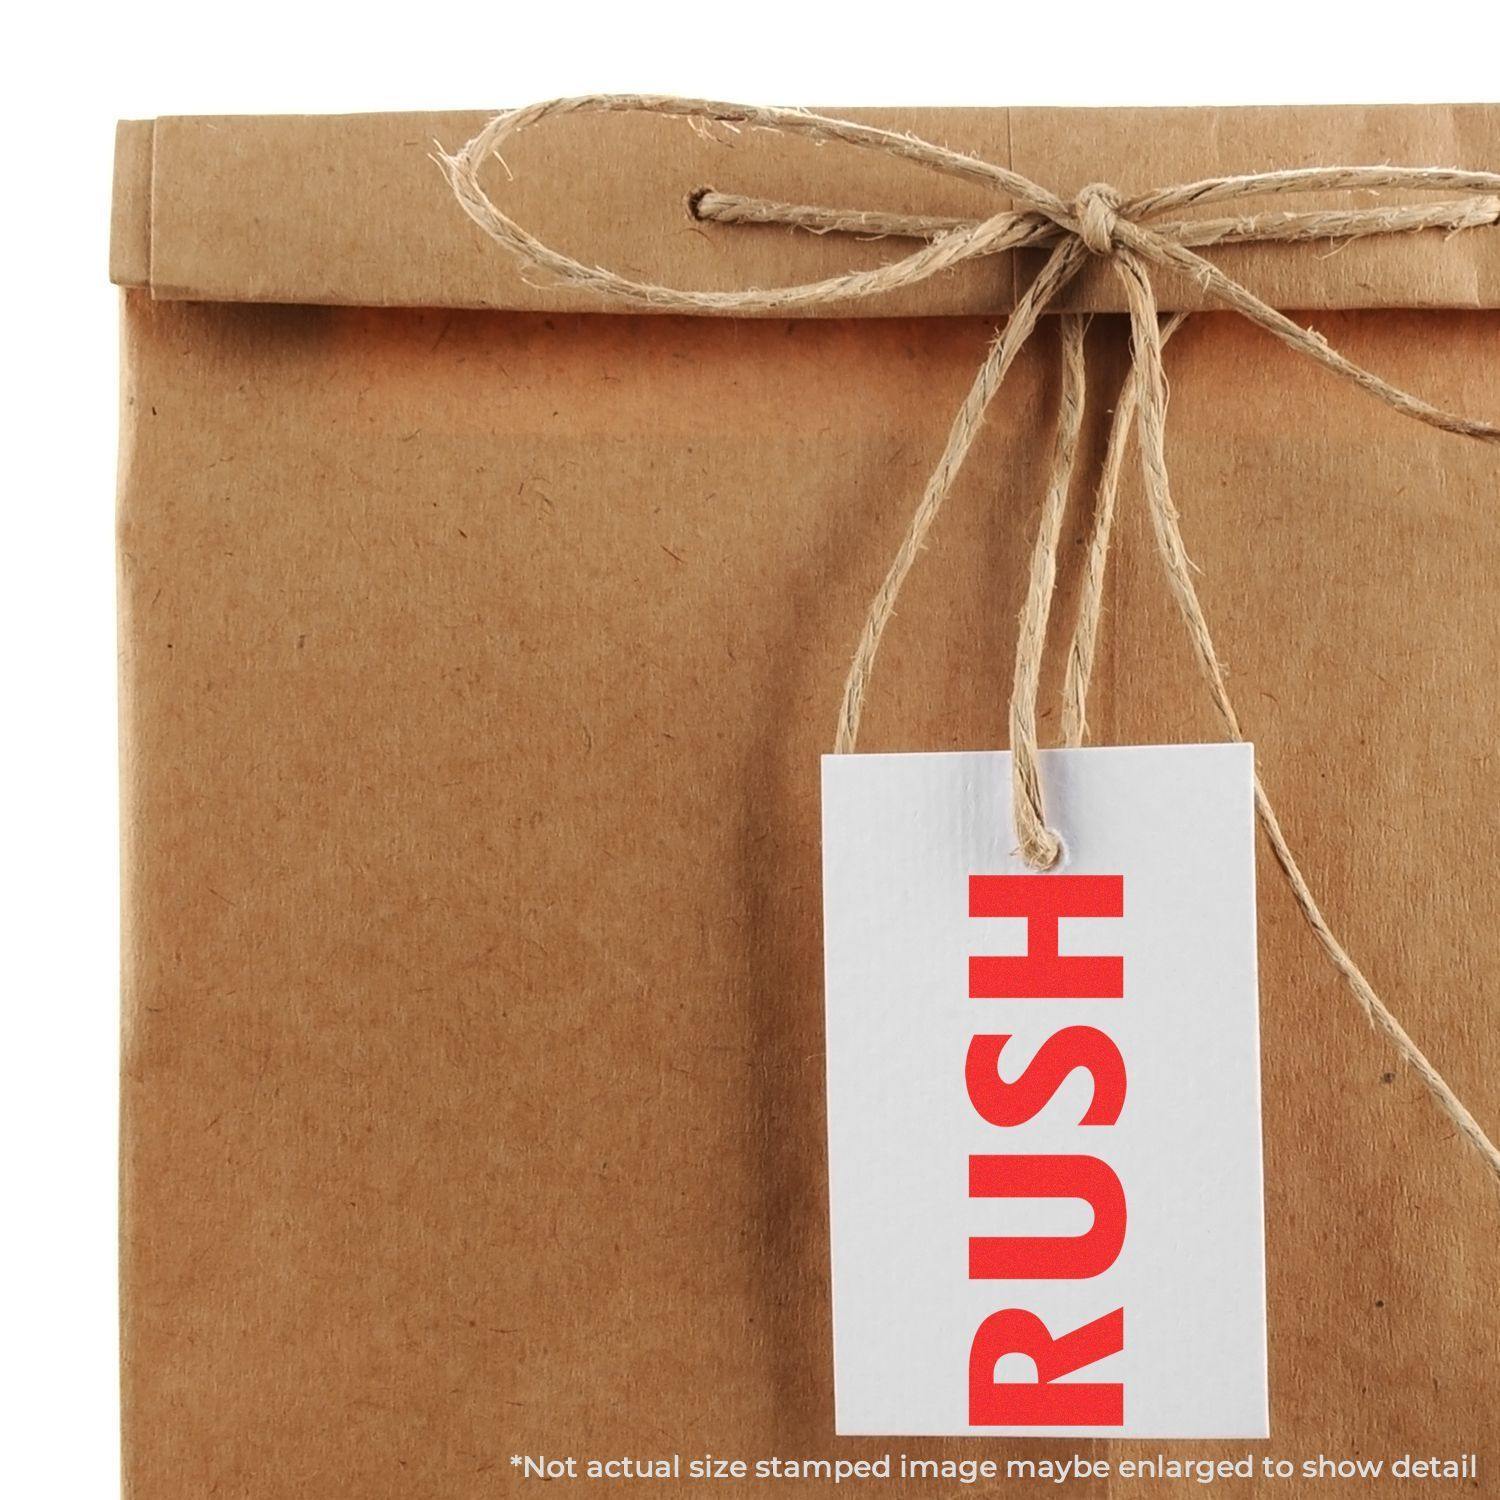 A stock office rubber stamp with a stamped image showing how the text "RUSH" in a large font is displayed after stamping.